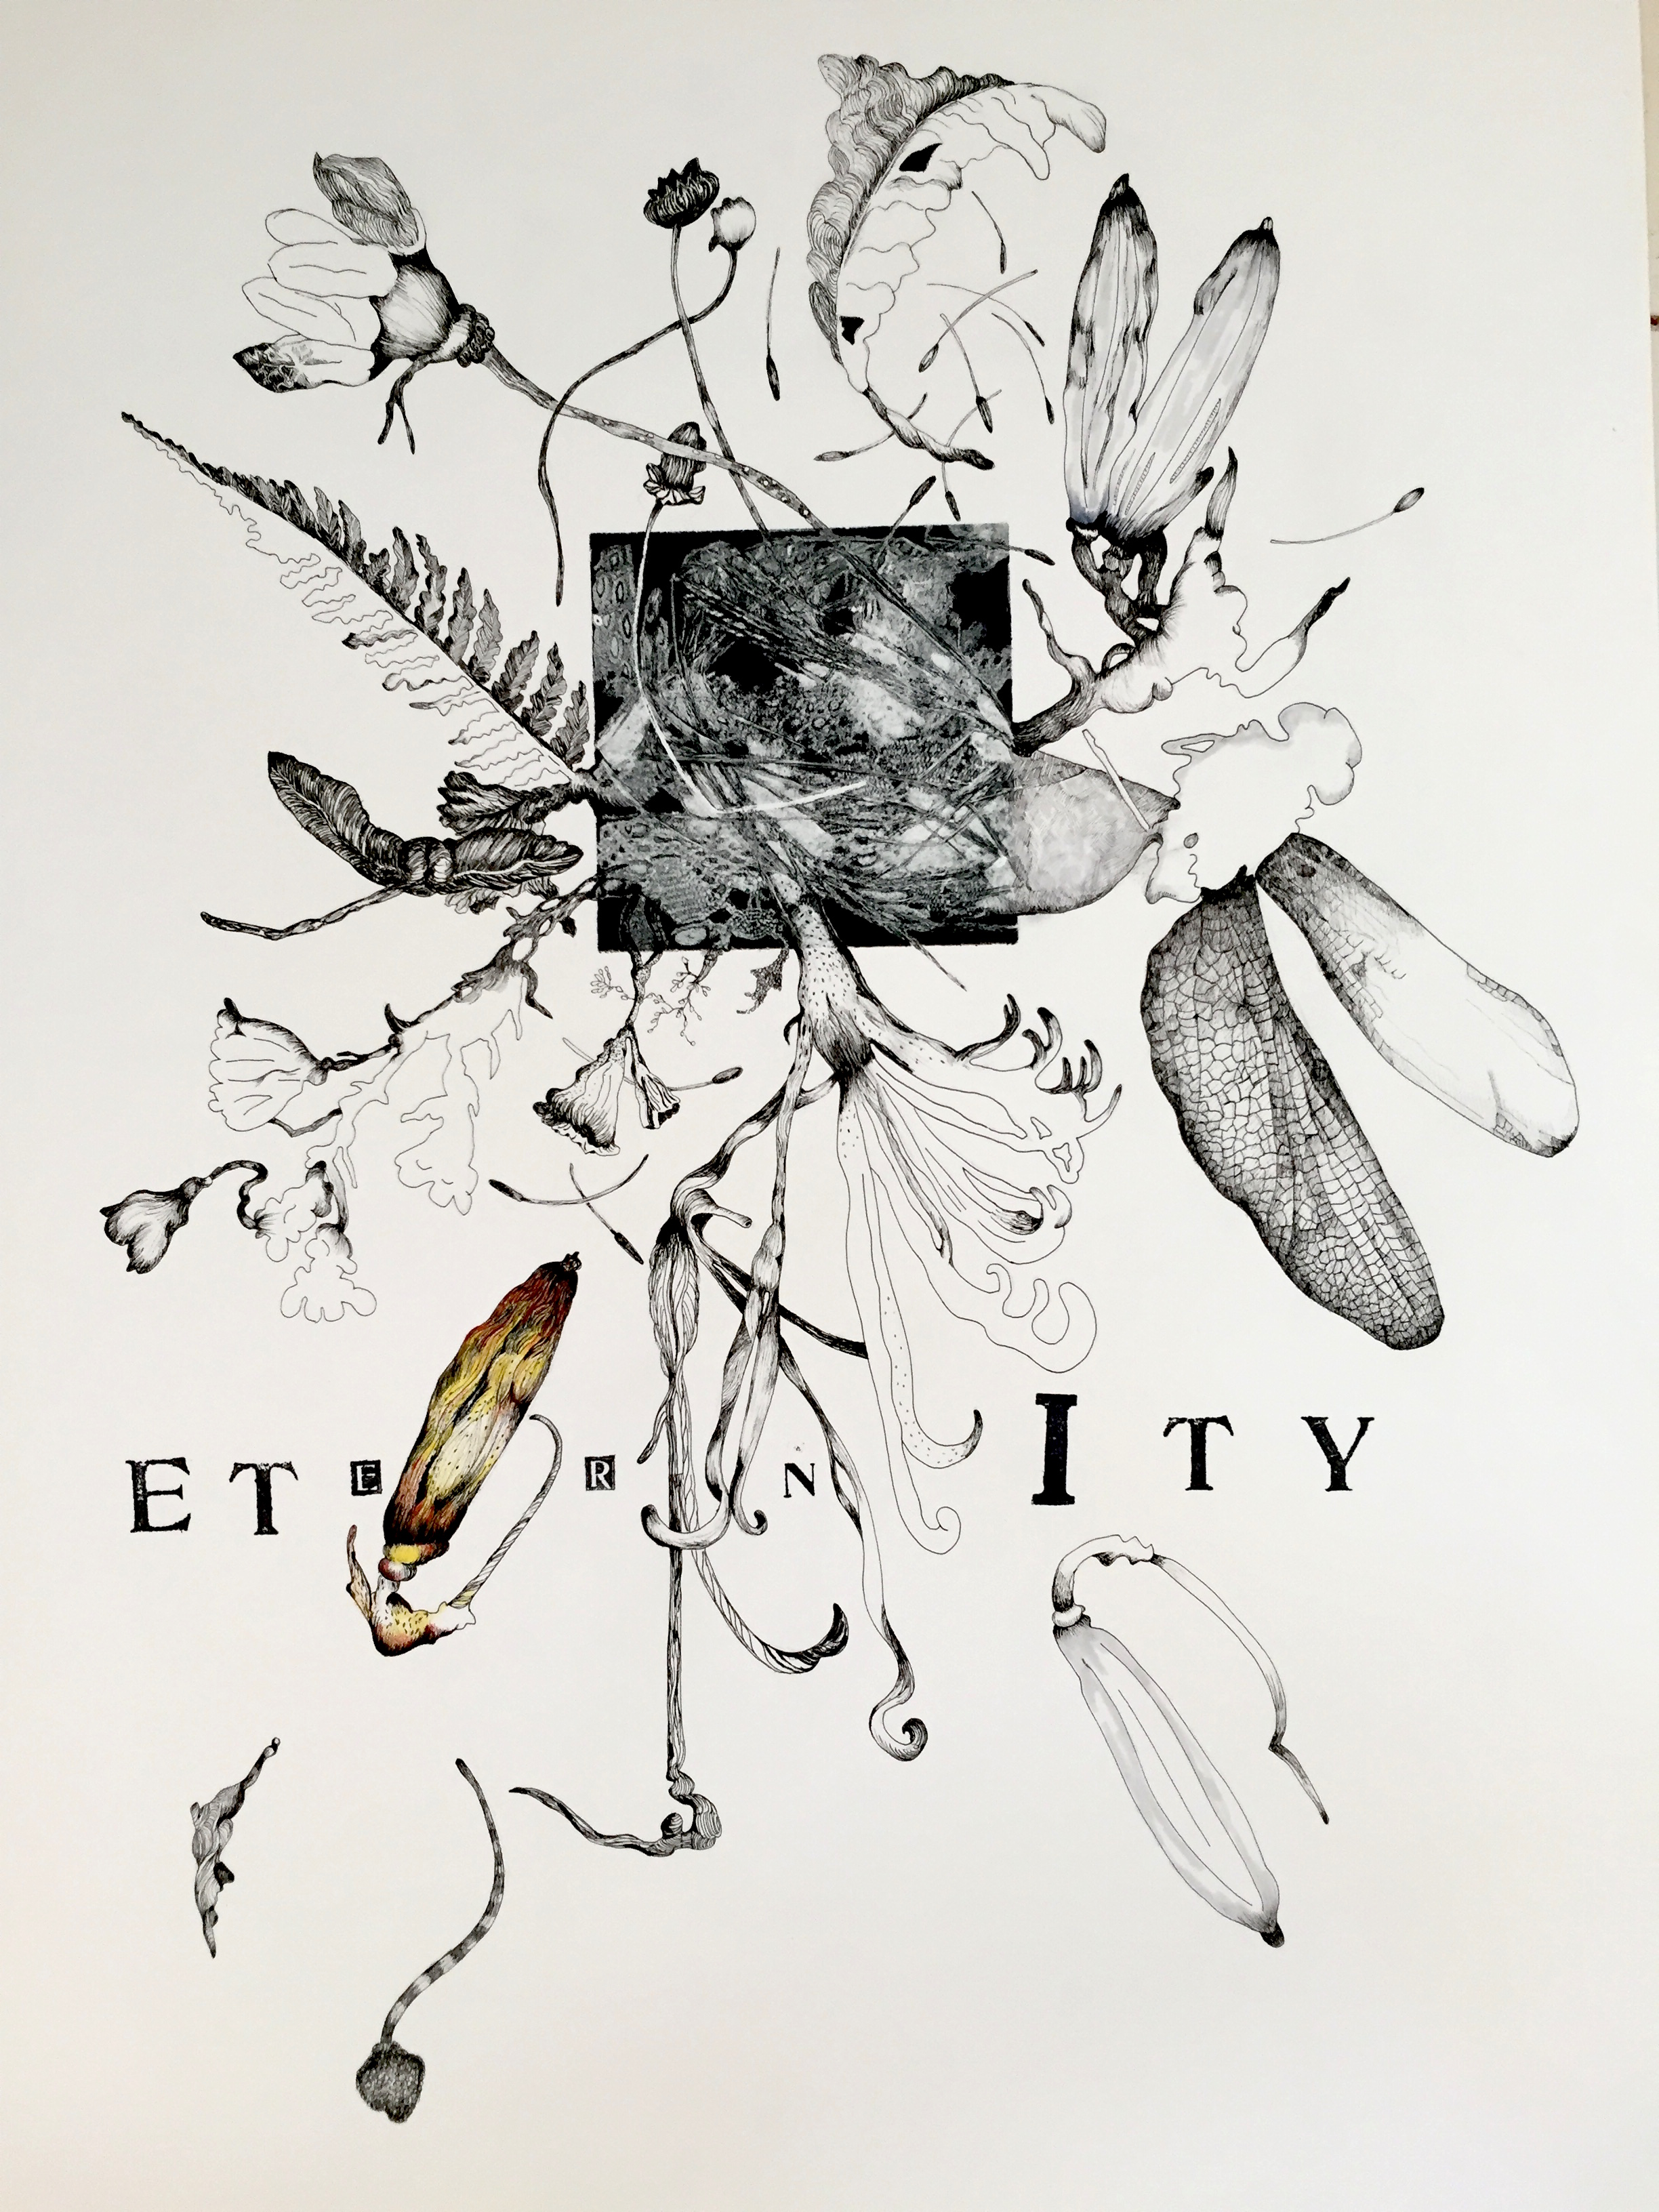   Eternity   23 x 30 inches  mixed media  image: Susan Webster   hand stamped text:Stuart Kestenbaum   2015 